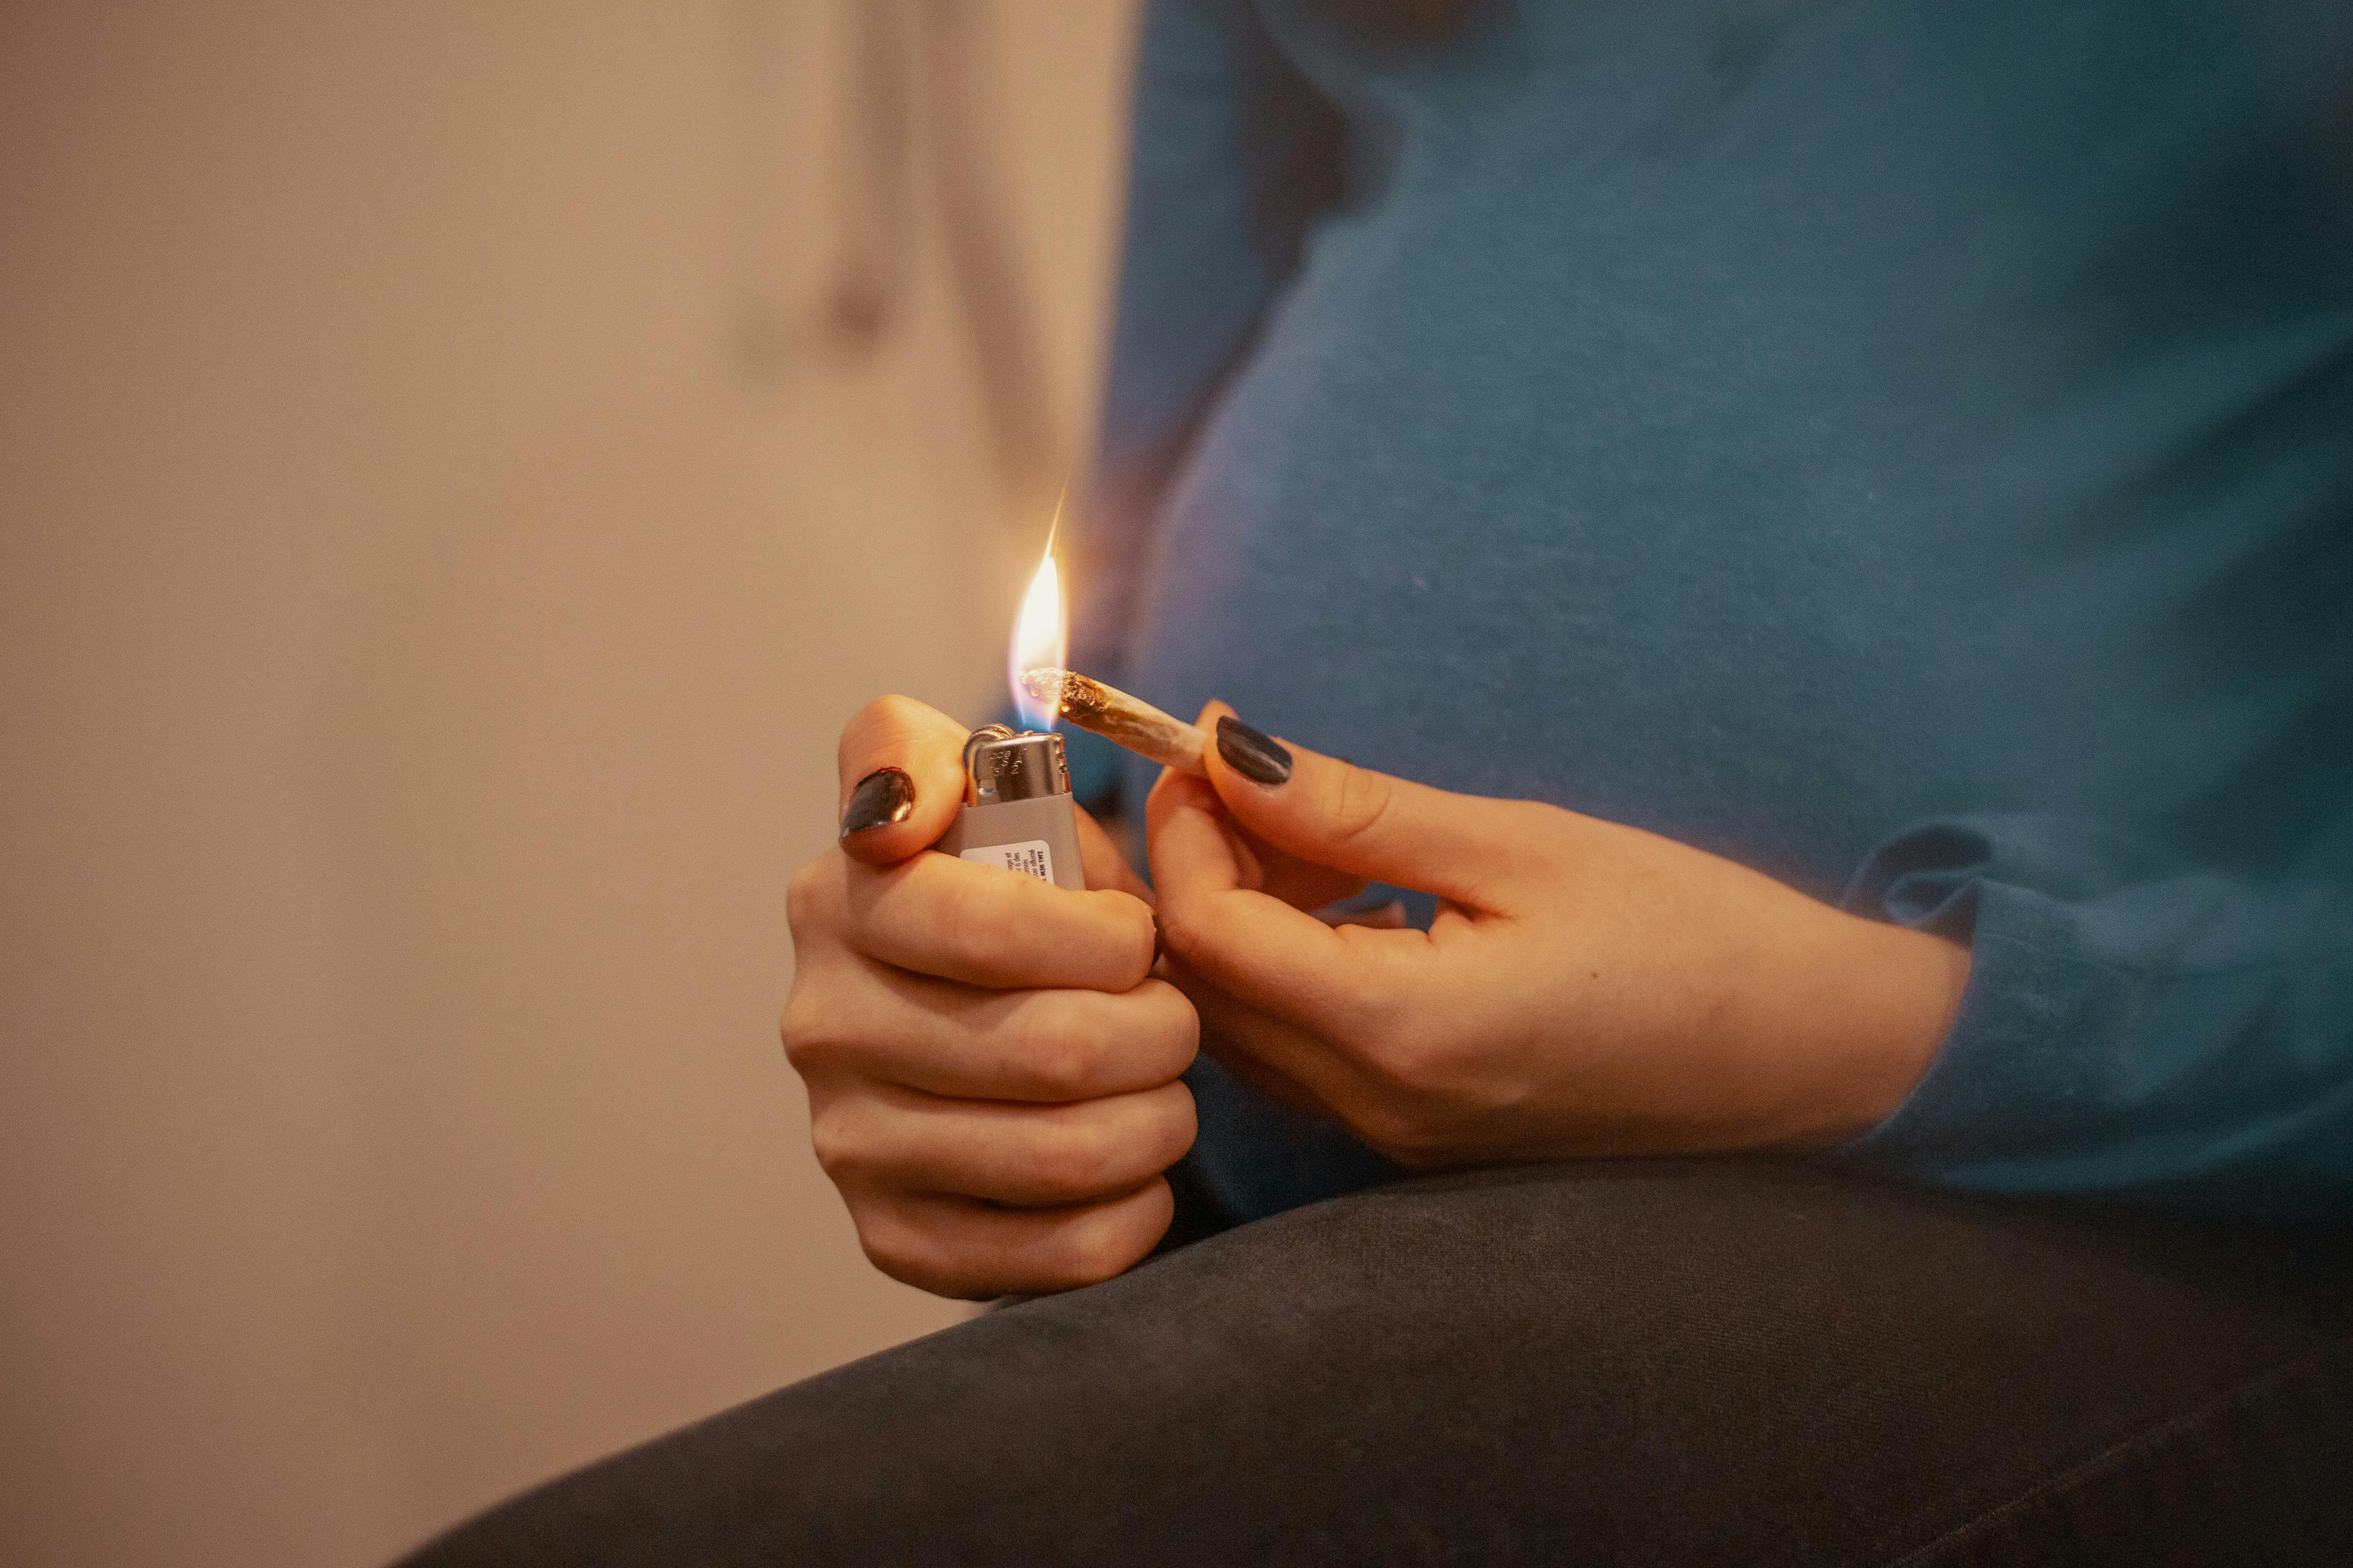 This is What You Should Know about Pregnancy and Smoking This Is What You Should Know About Smoking Weed During Pregnancy